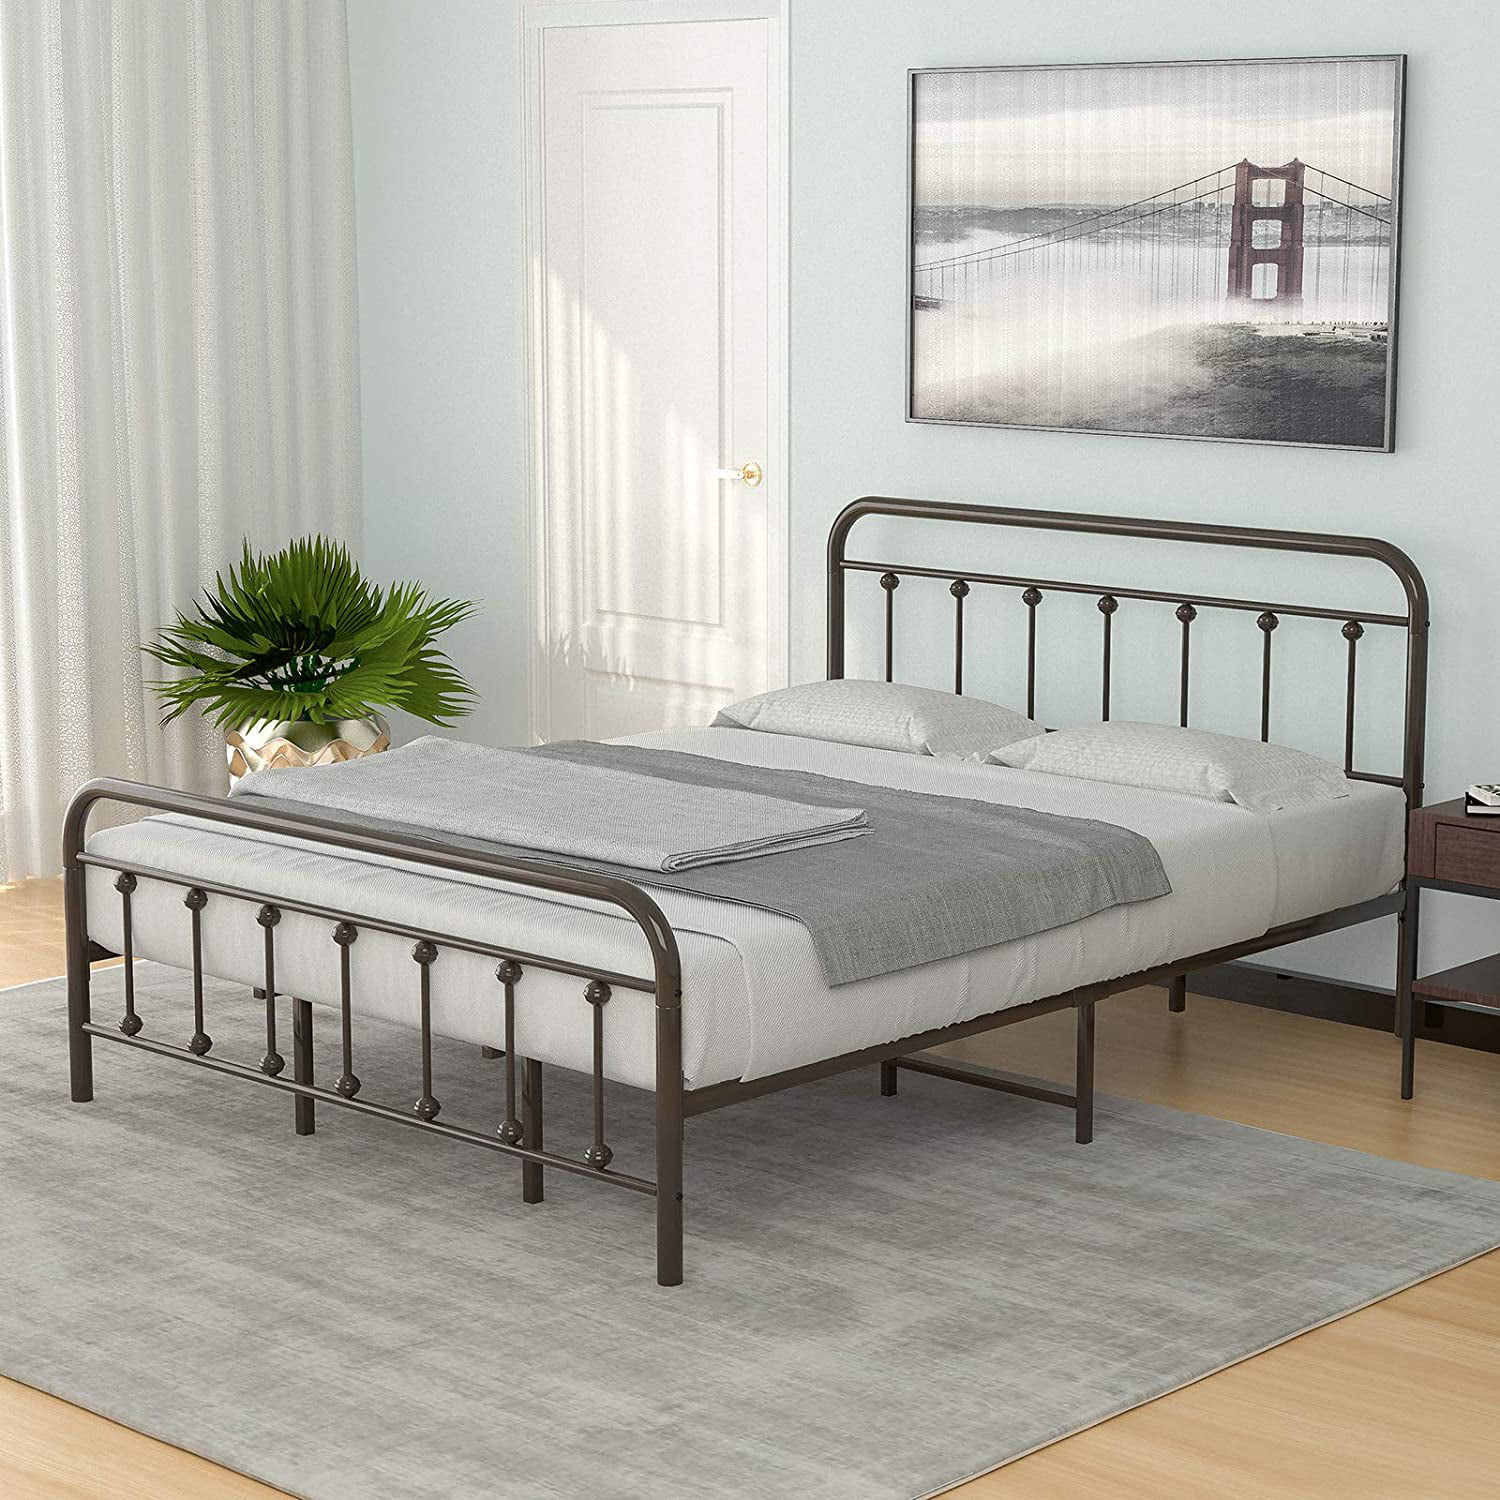 Platform Bed with Strong Metal Slats Black Upholstered Faux Leather Headboard Easy Assembly No Box Spring Needed Twin, Black mecor Vintage Metal Twin Bed Frame